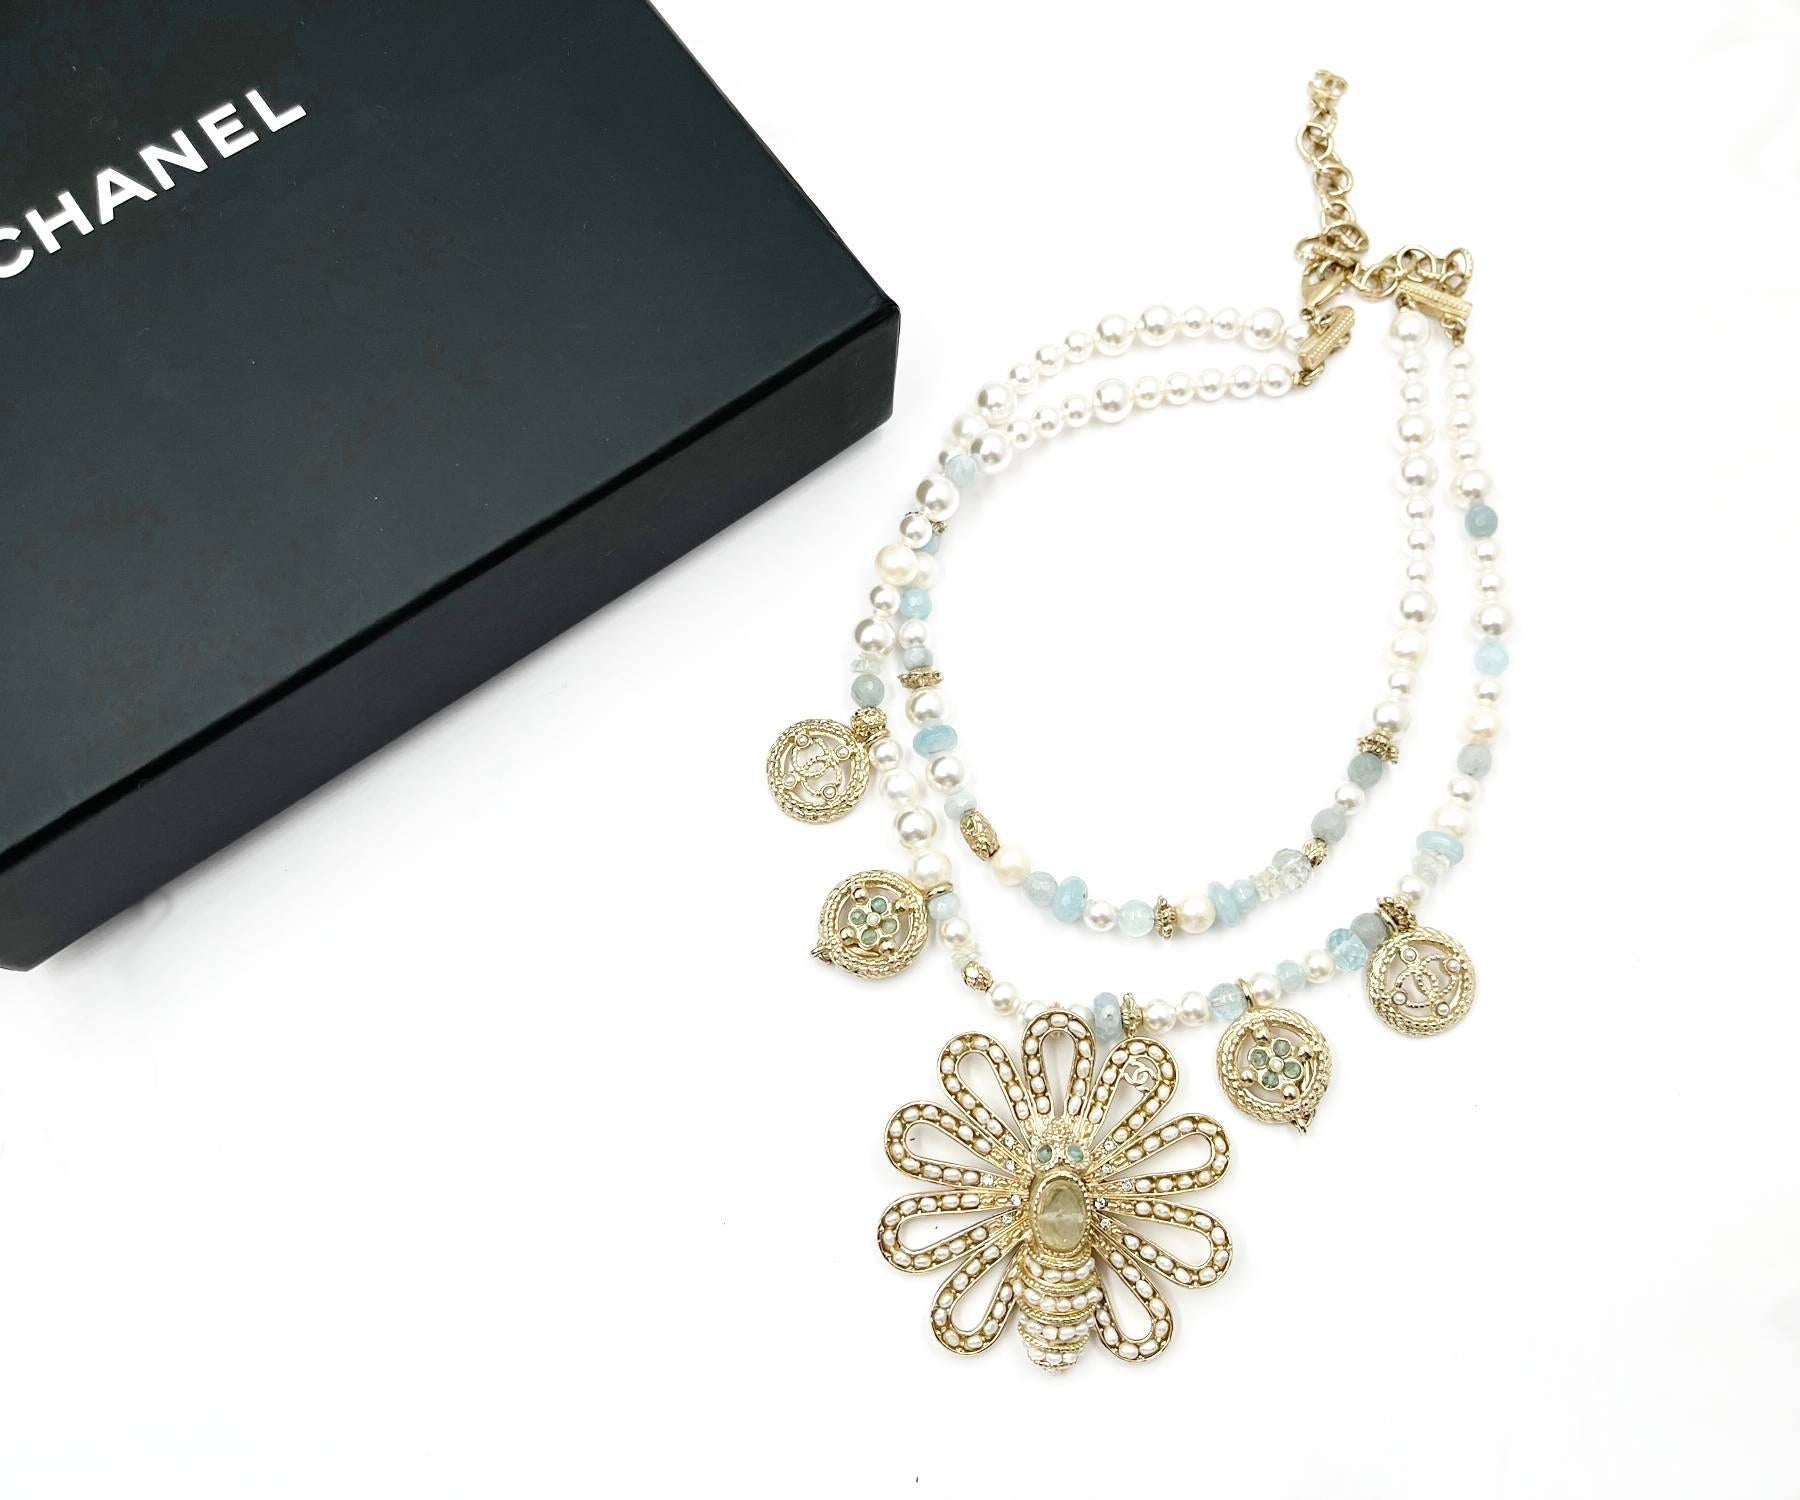 Chanel Gold Bee Seed Pearl Pendants 2 Strand Aquamarine Pearl Necklace

*Marked 18
*Made in France
*Comes with original box and pouch

-Approximately 19″ long
-The largest pendant is approxaimtely 2.3″ x 2.3″.
-Very classic and pretty
-In a pristine